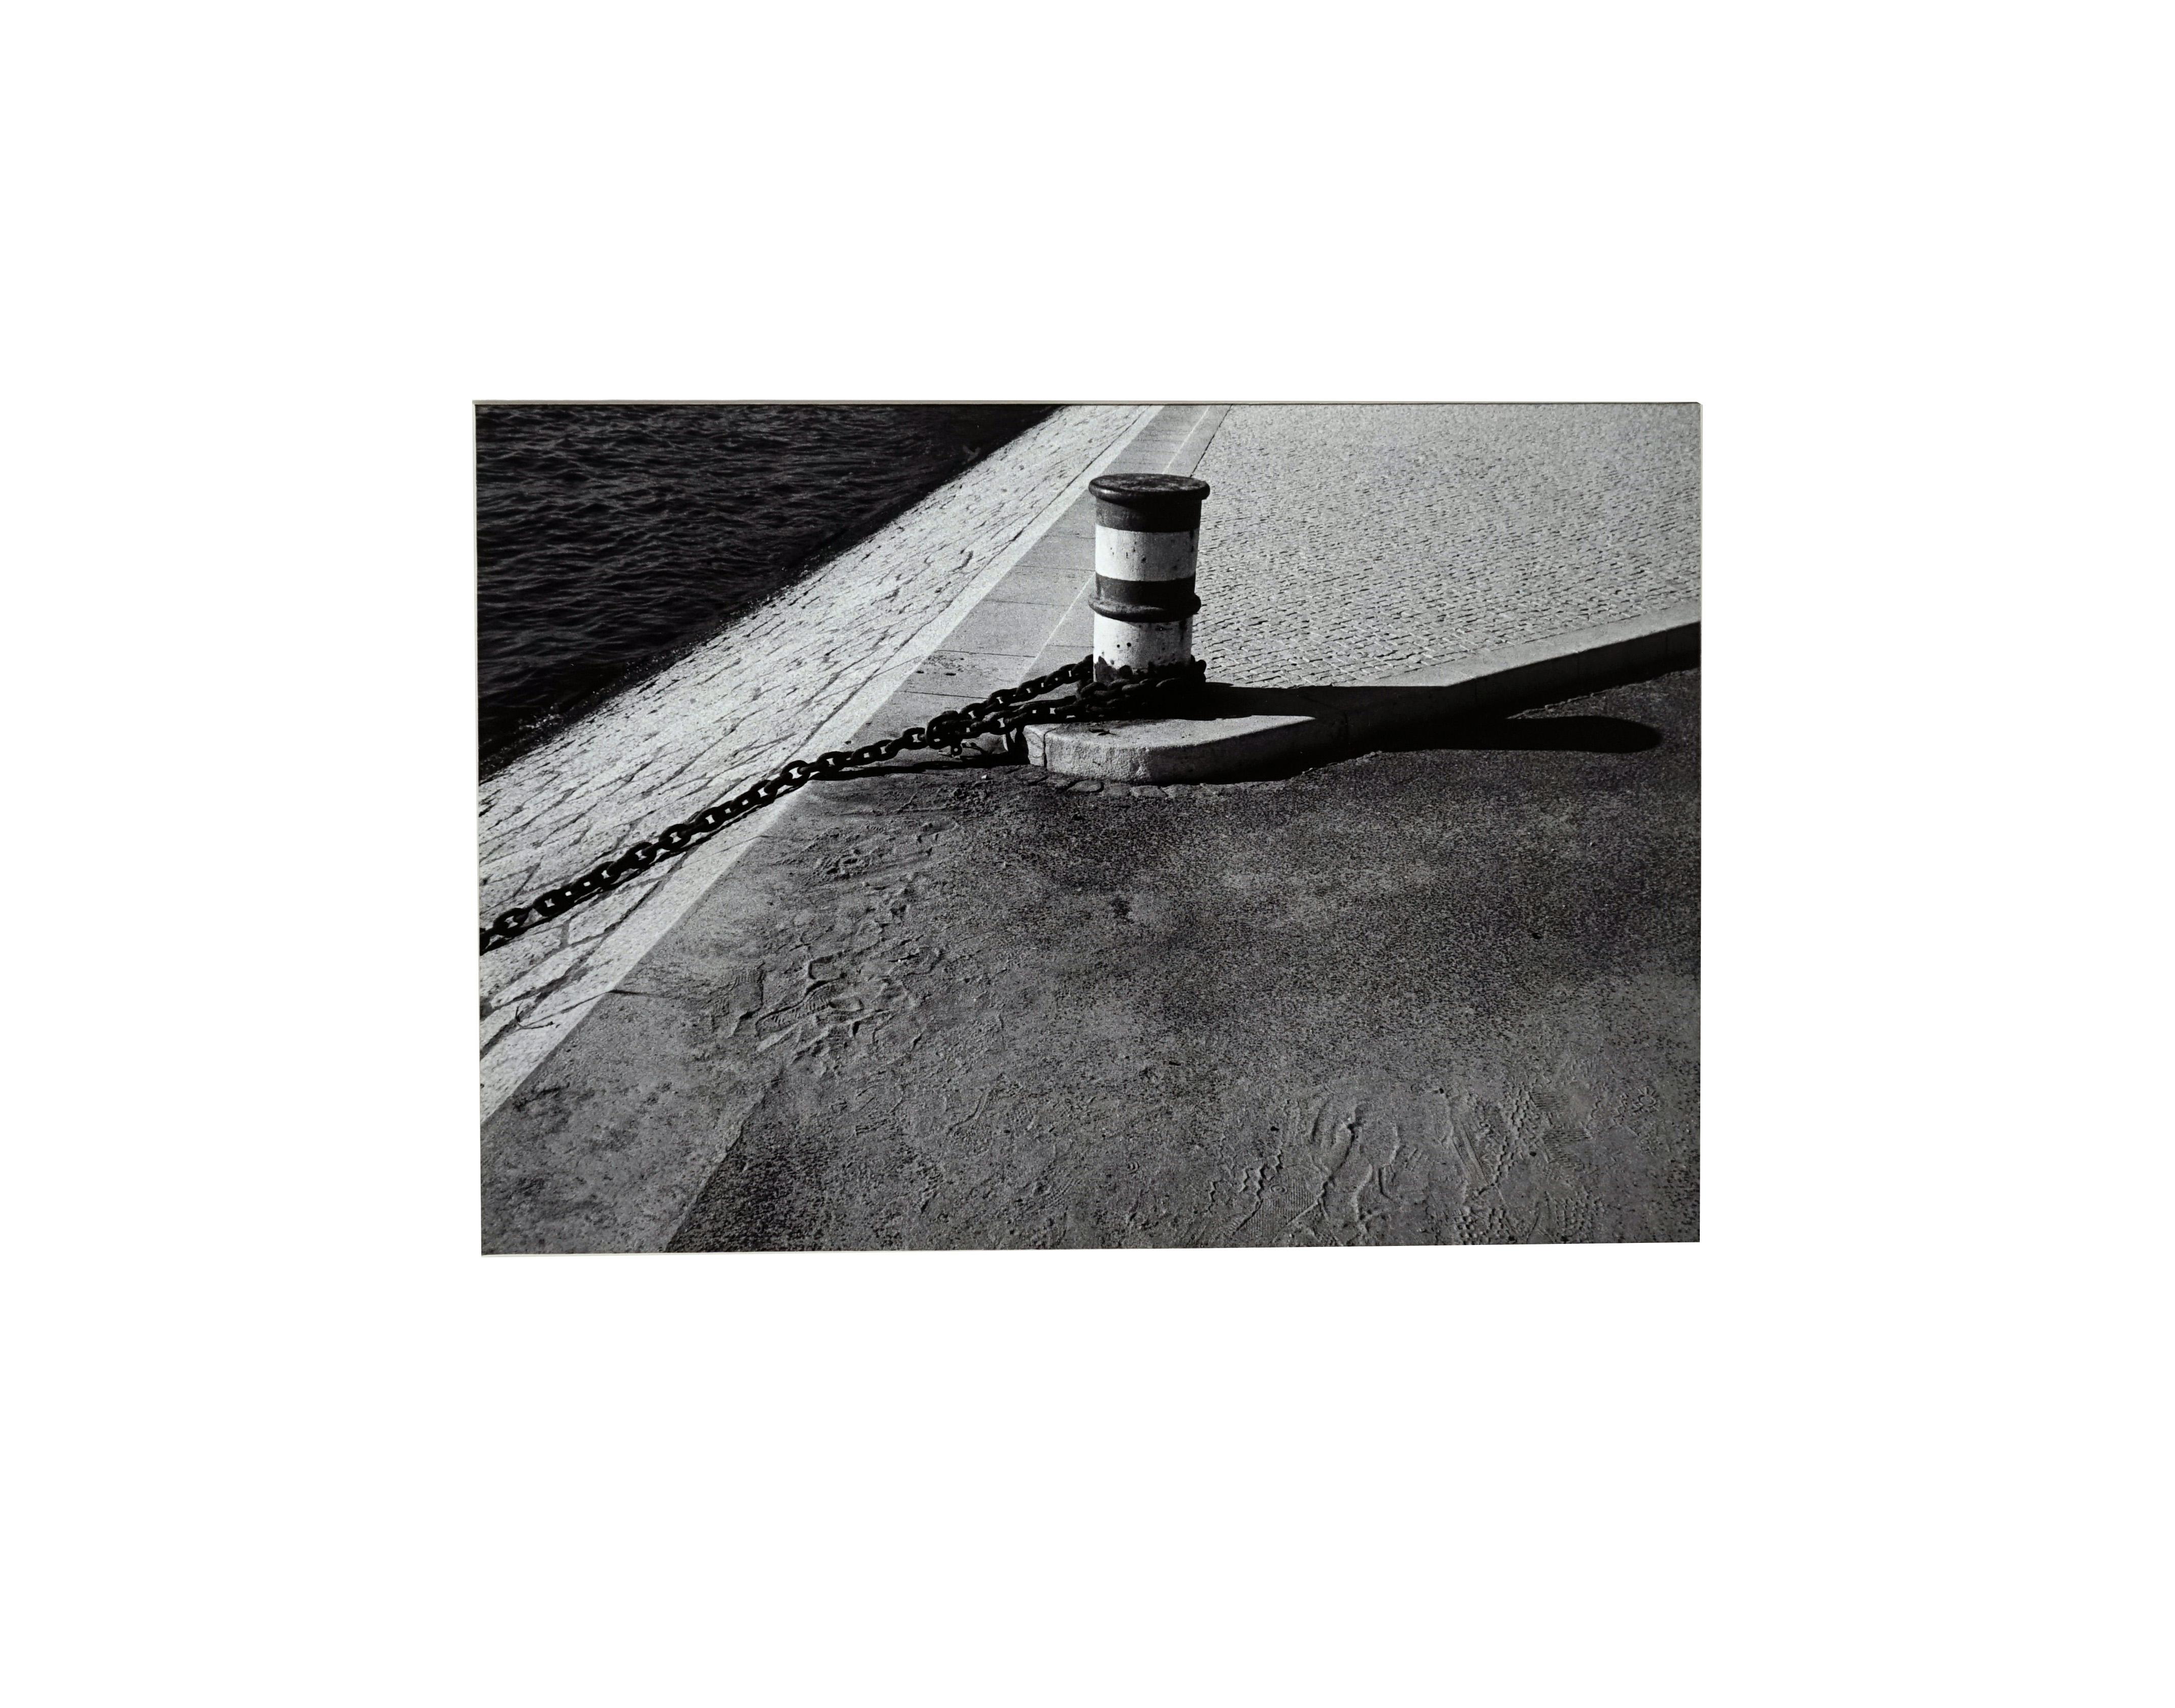 Artwork sold in perfect condition - Off-Print # 2 (Lisbon 1982) from the portfolio Rivages (Coffret Prestige # 2)
This image was captured on film (1982)  The selected negative was printed on Baryta paper by the author and then limited digital